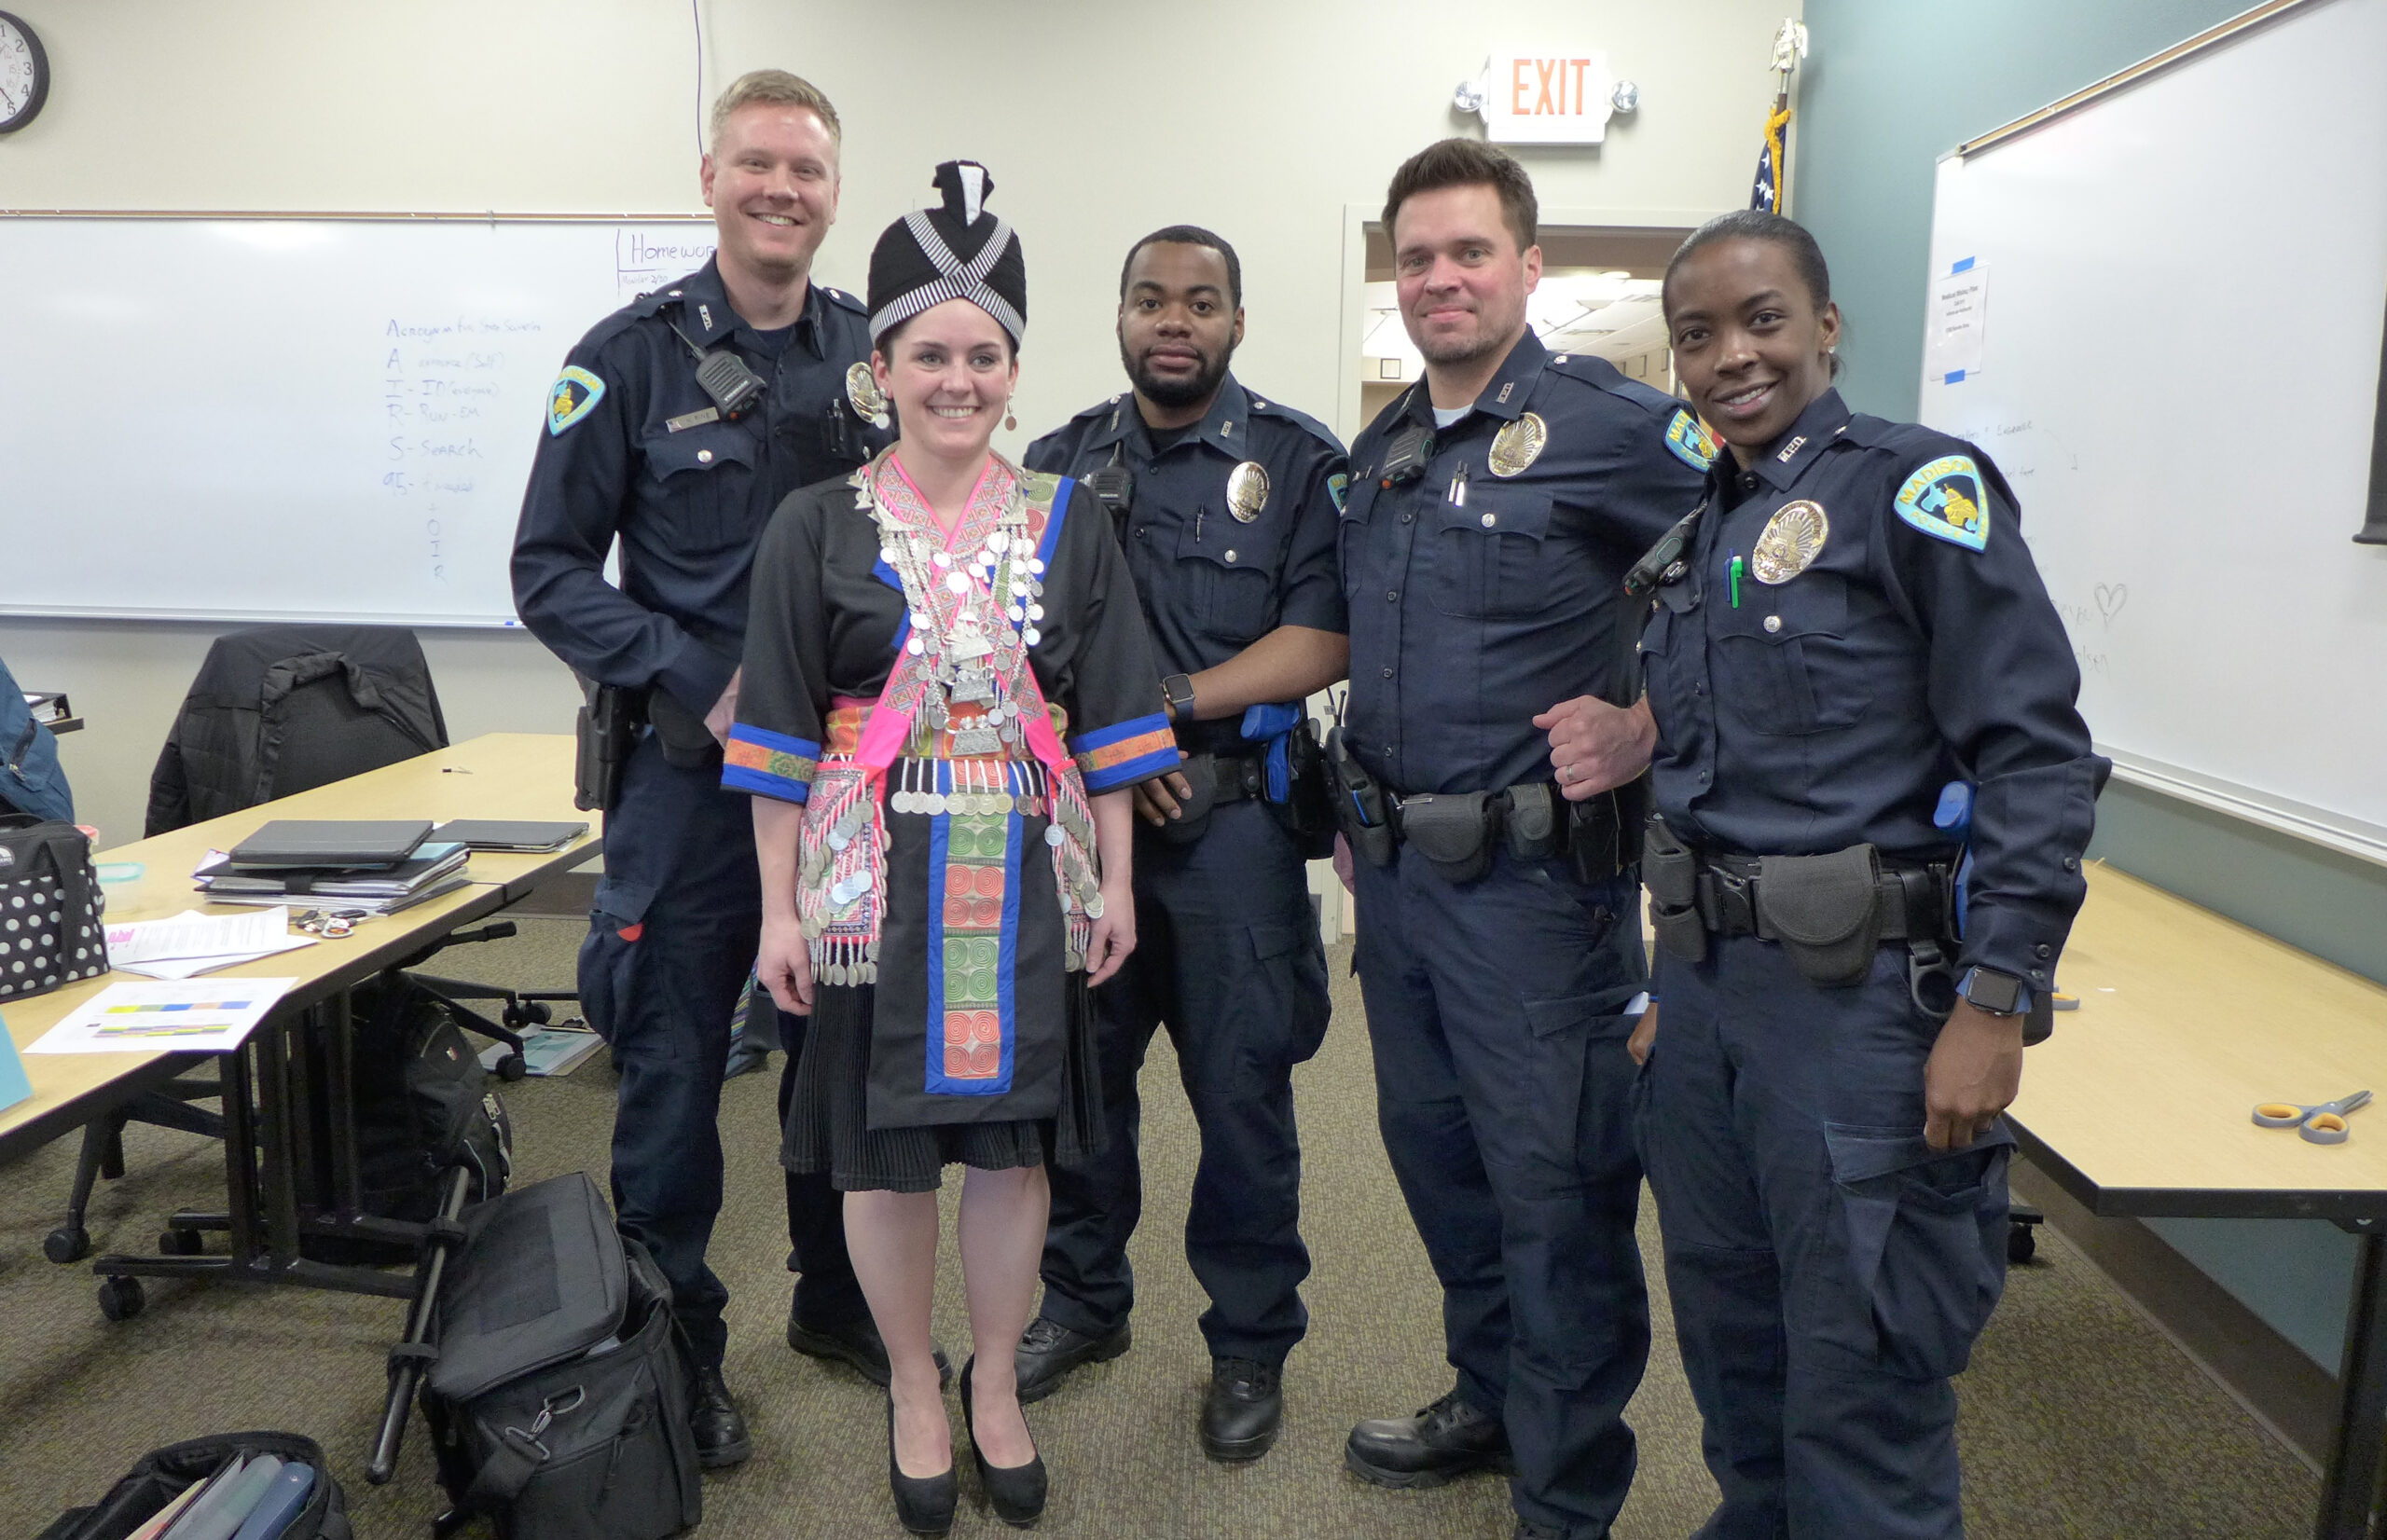 Madison Police recruits, left to right, Nick Pine, Stephanie Nelson, Ray Gillard, Mark Gulden and Lyjya Miles pose during a cultural competence class about Hmong culture.